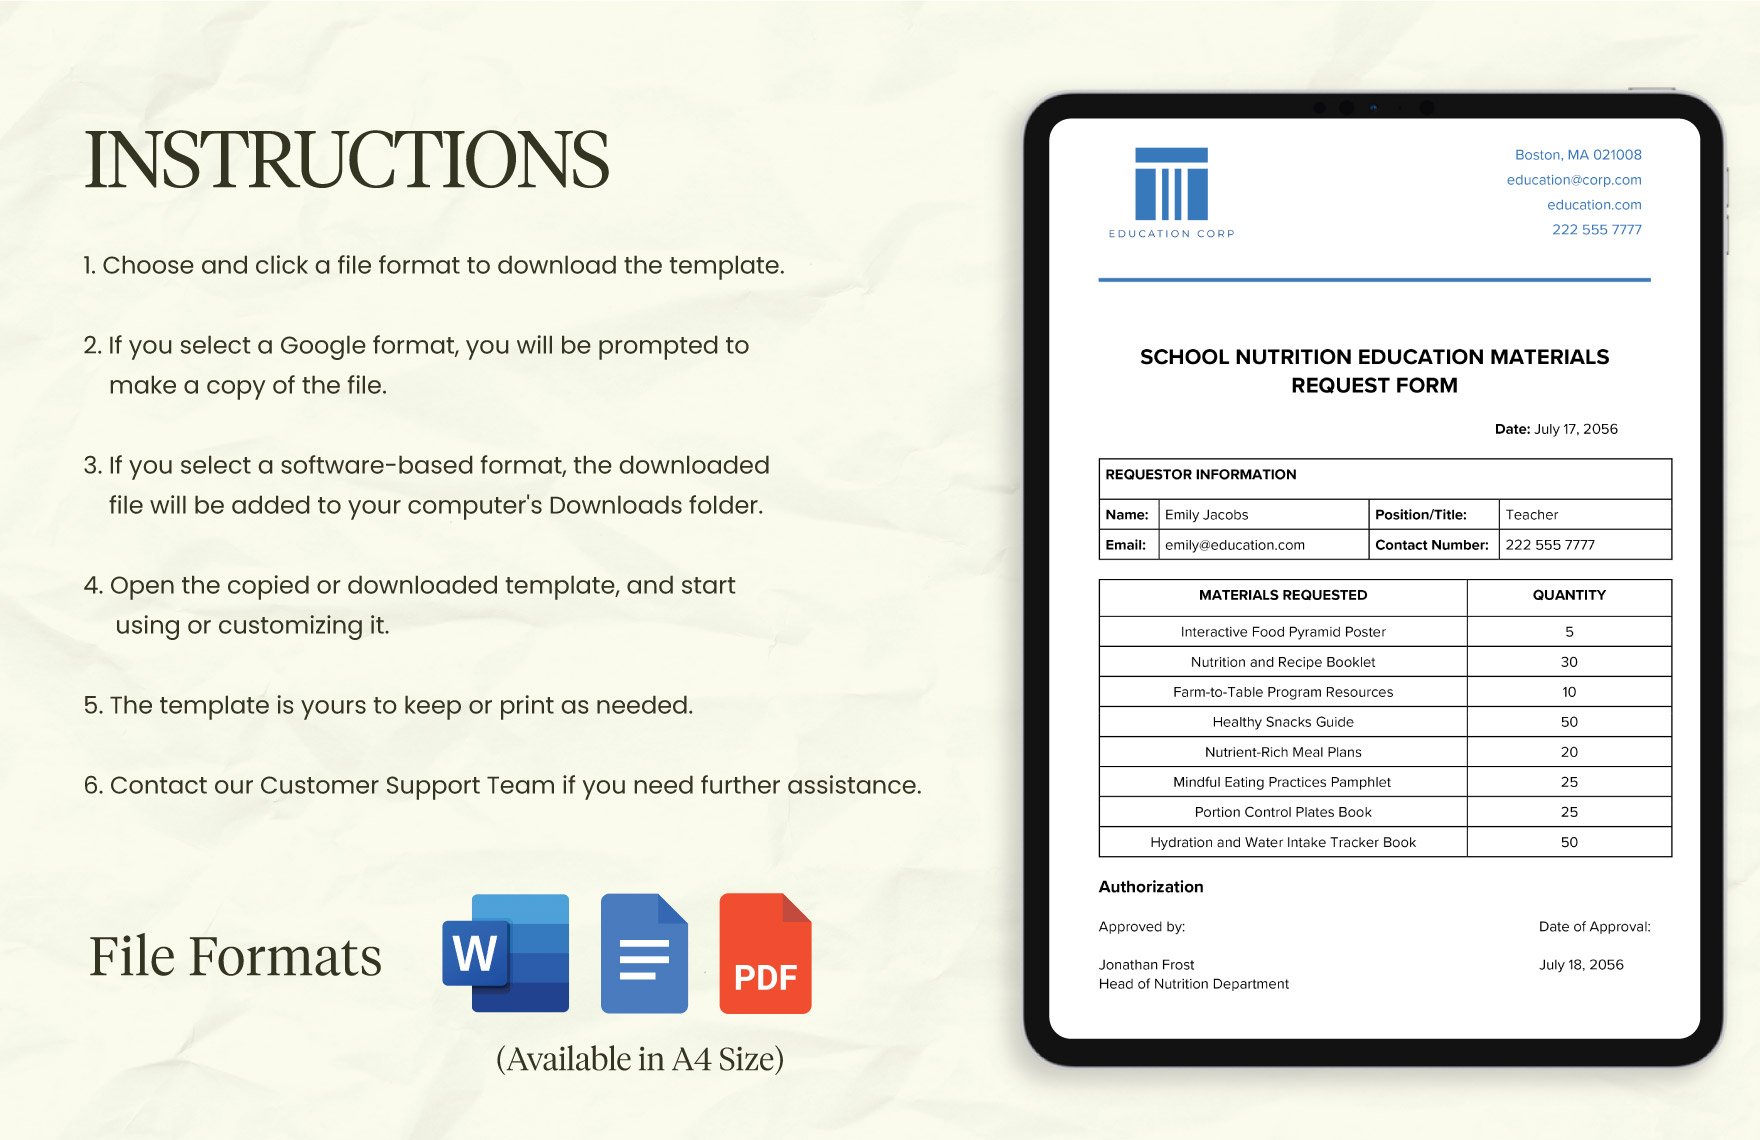 School Nutrition Education Materials Request Form Template